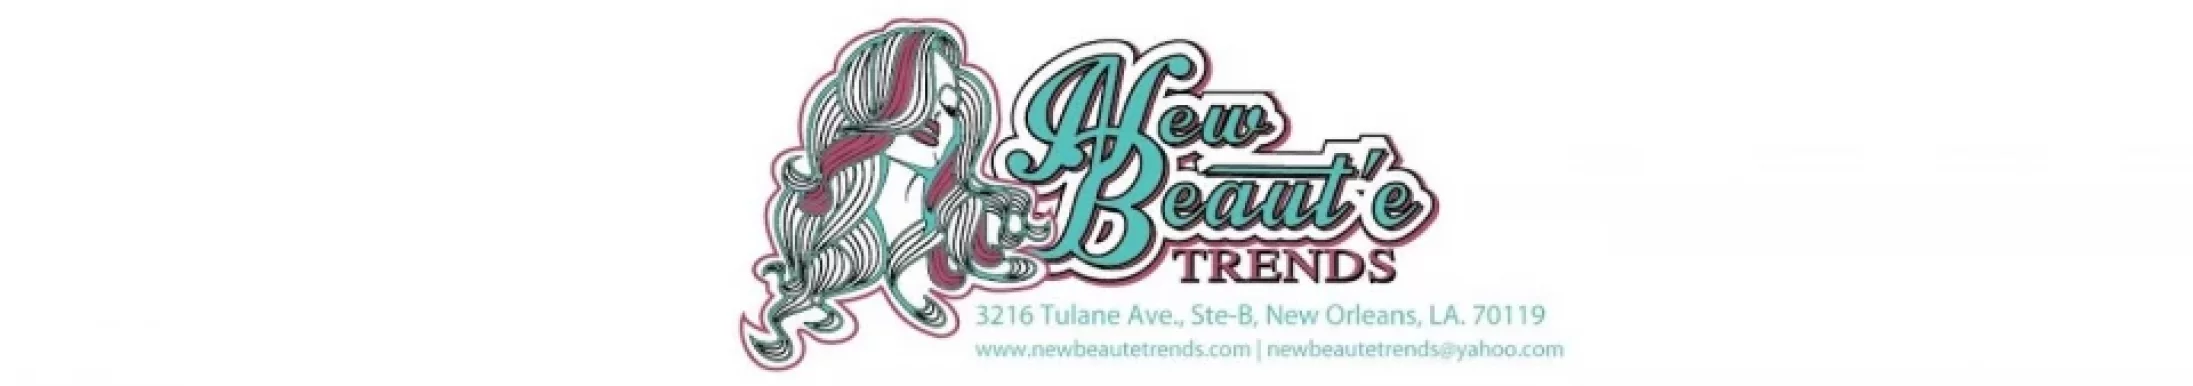 New Beaute Trends, New Orleans - Photo 5